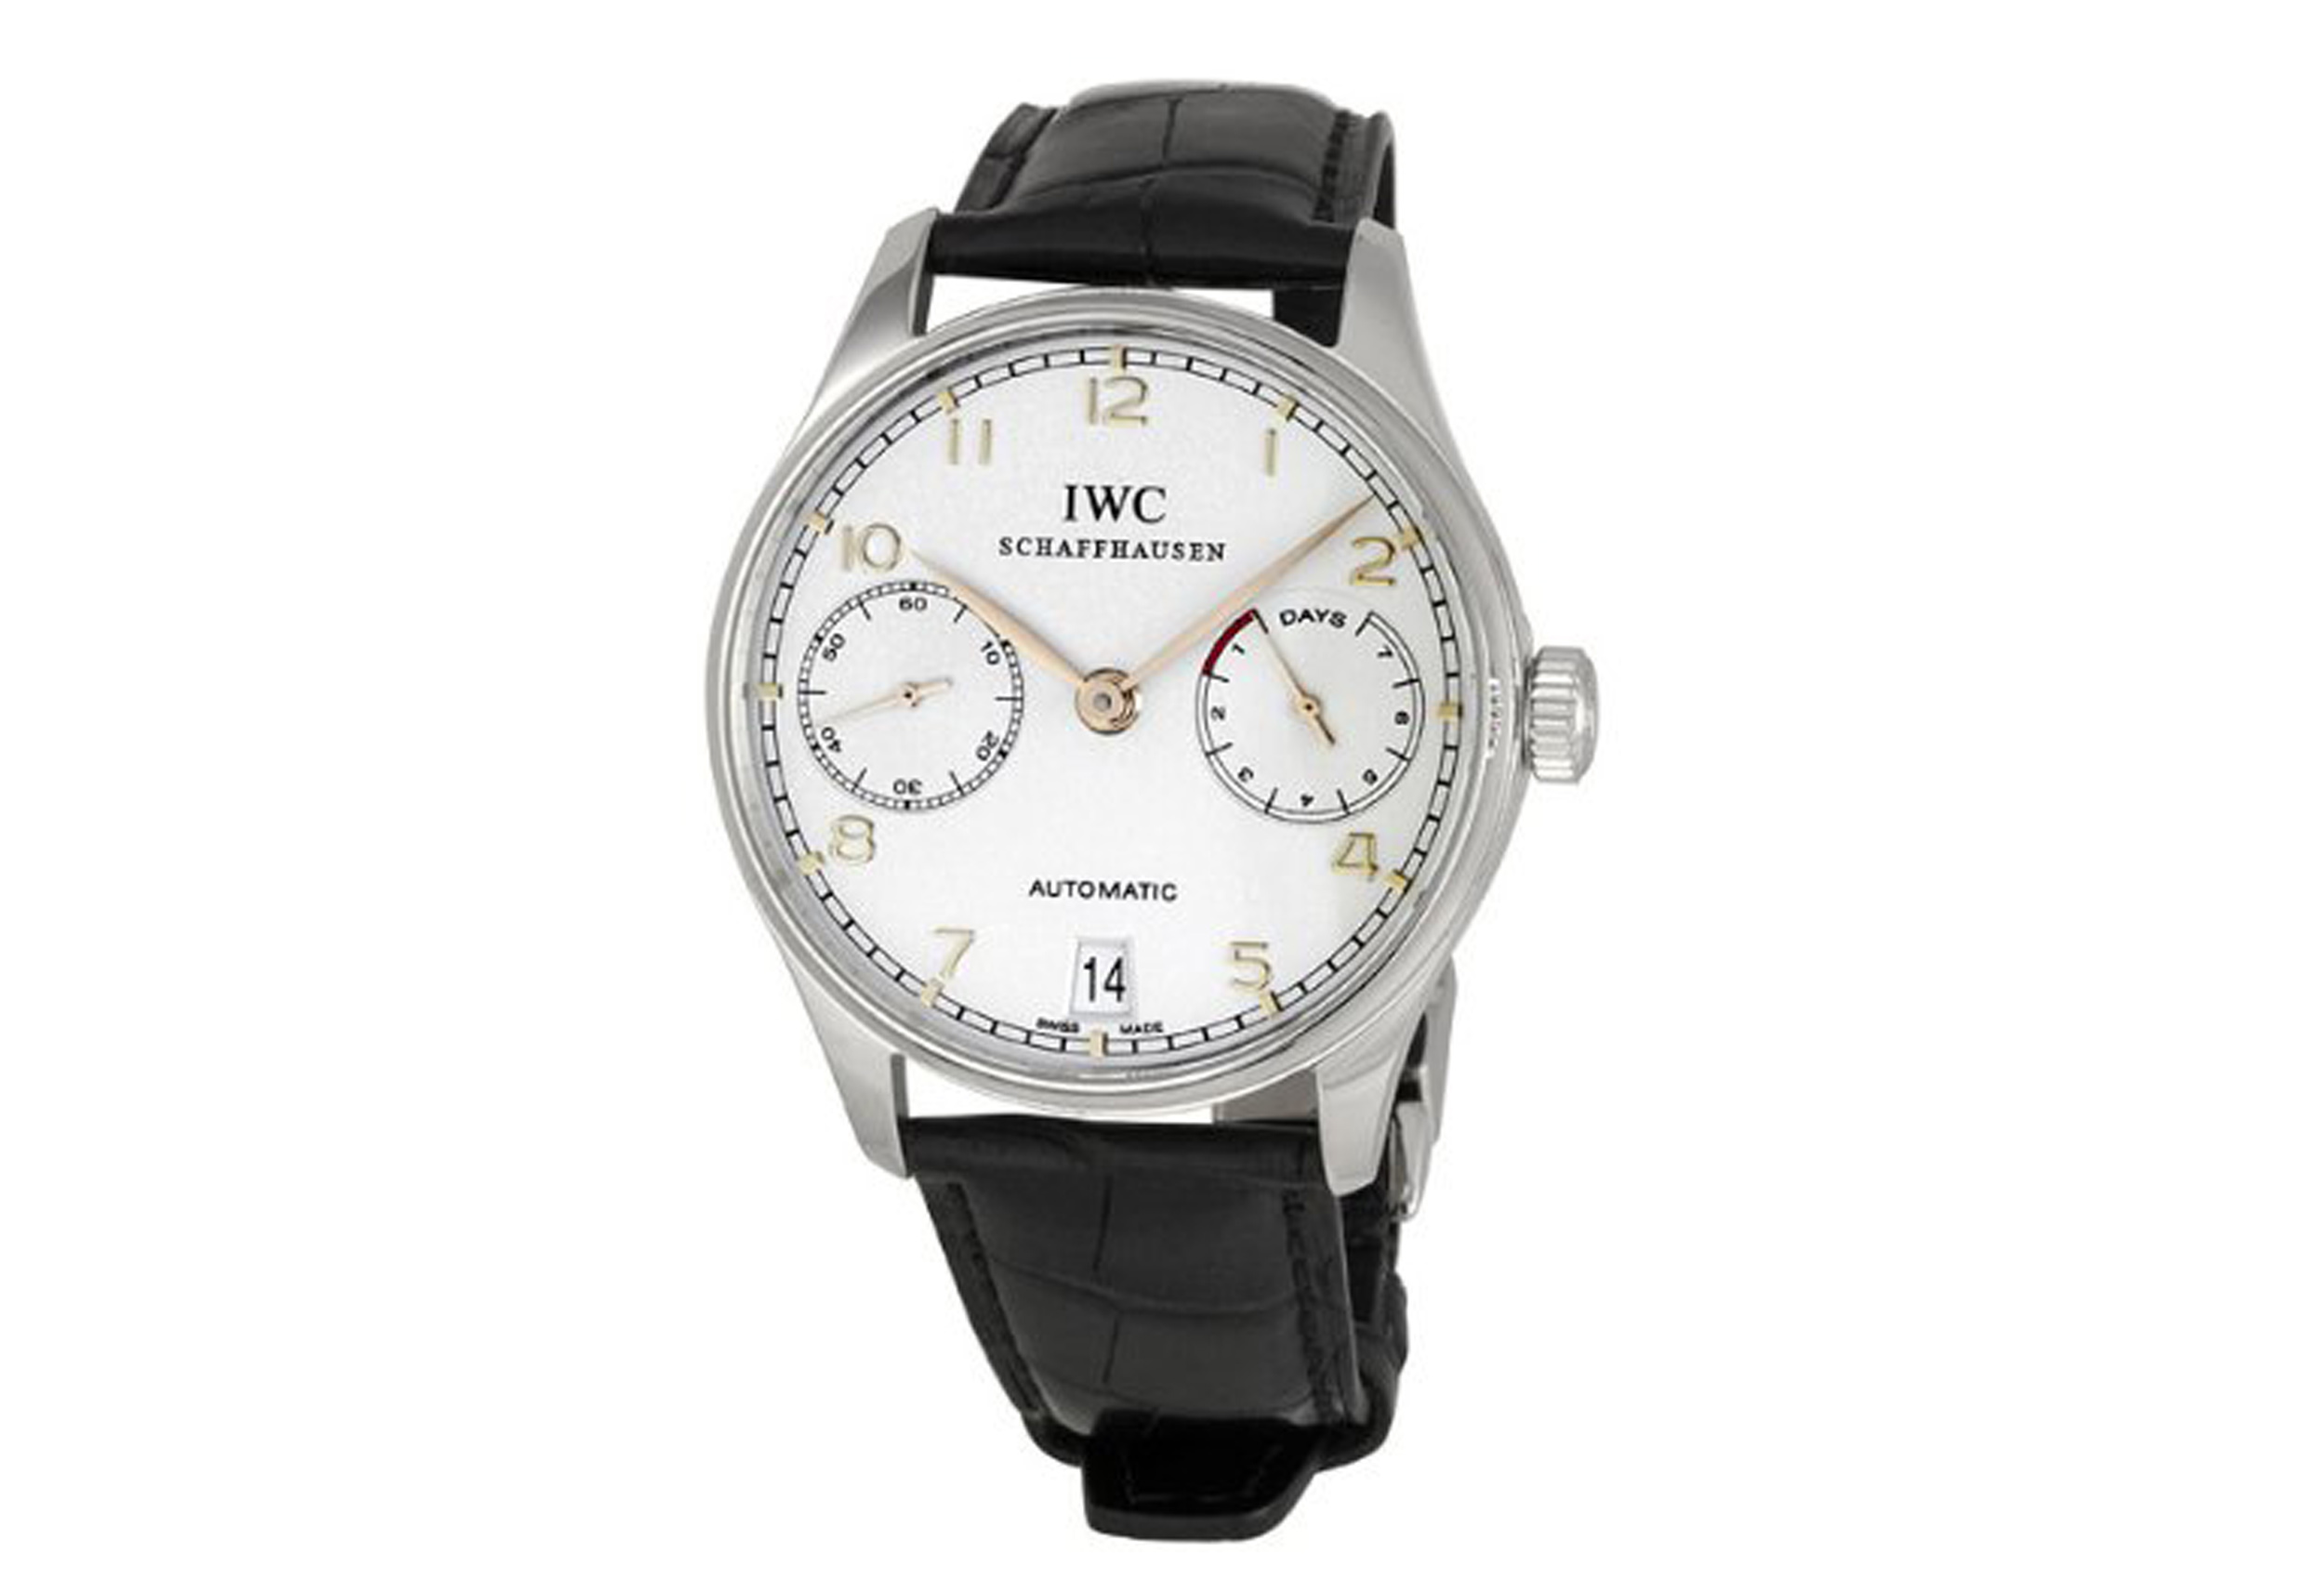 PHOTO: Pictured is an IWC Portuguese Automatic priced at $10,470.98.